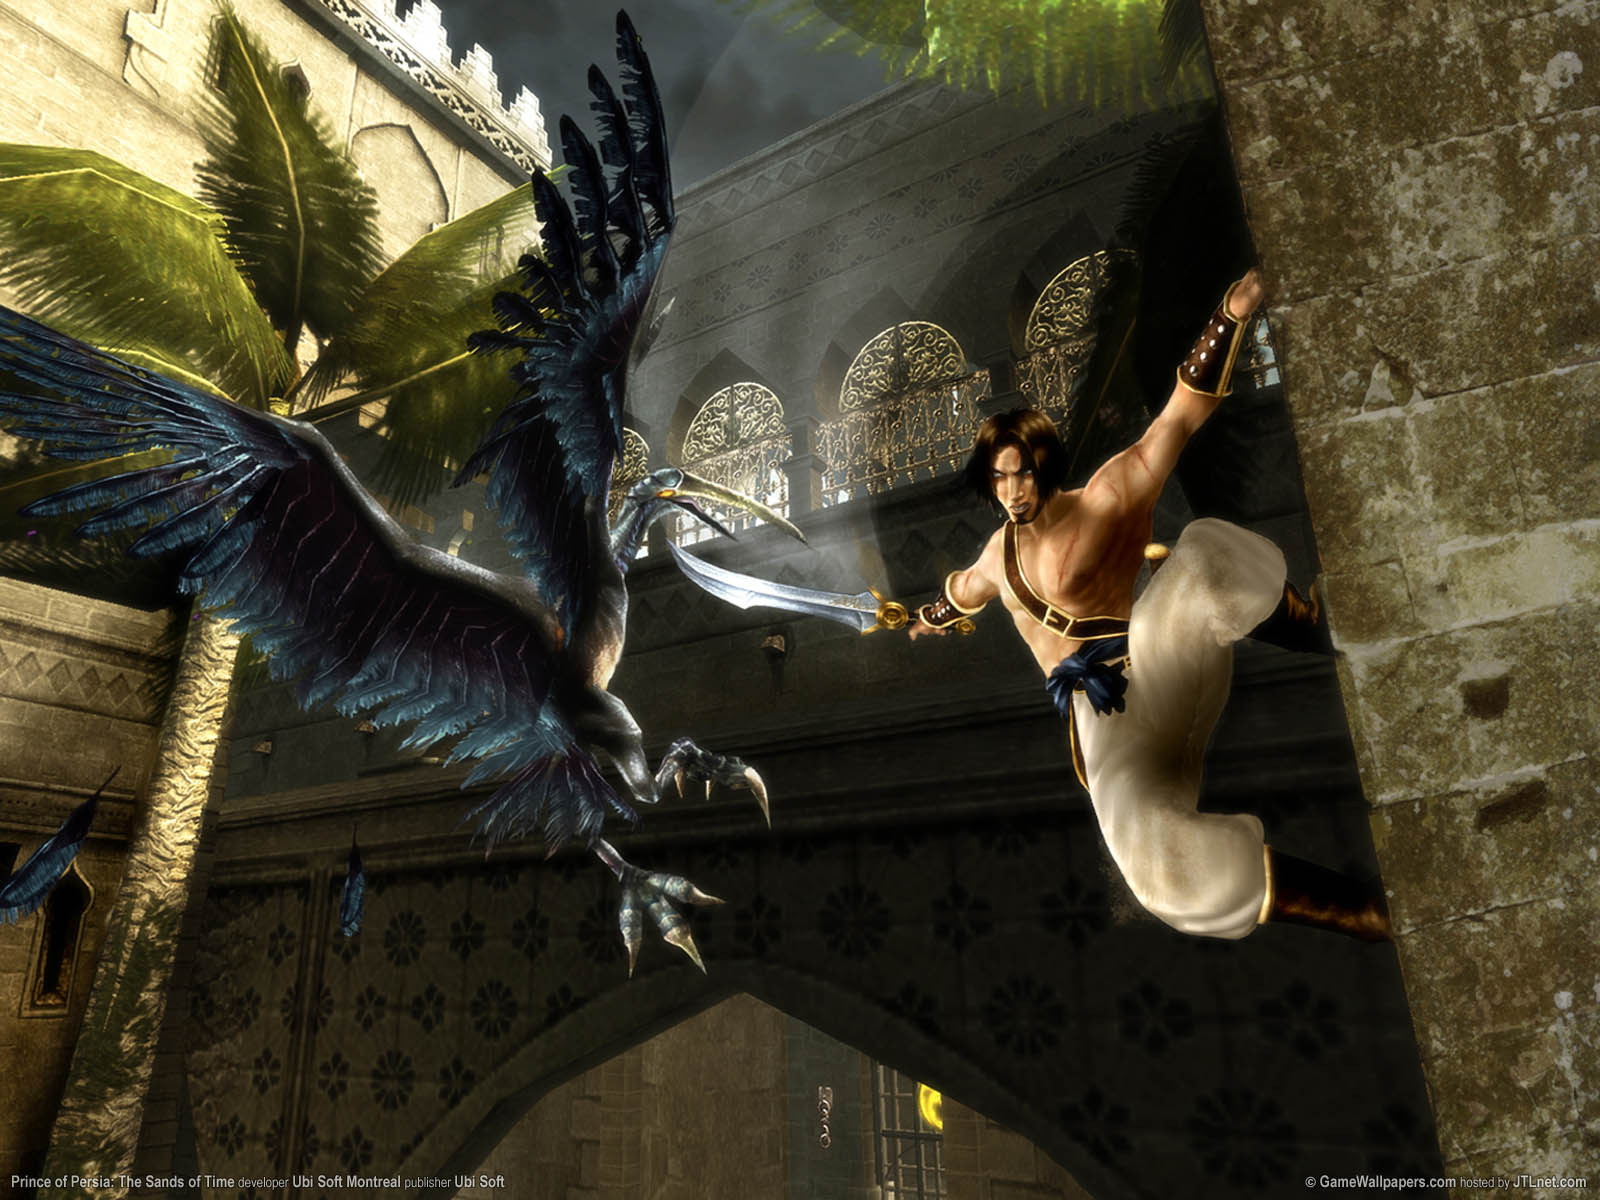 Prince of Persia: The Sands of Time fond d'cran 02 1600x1200